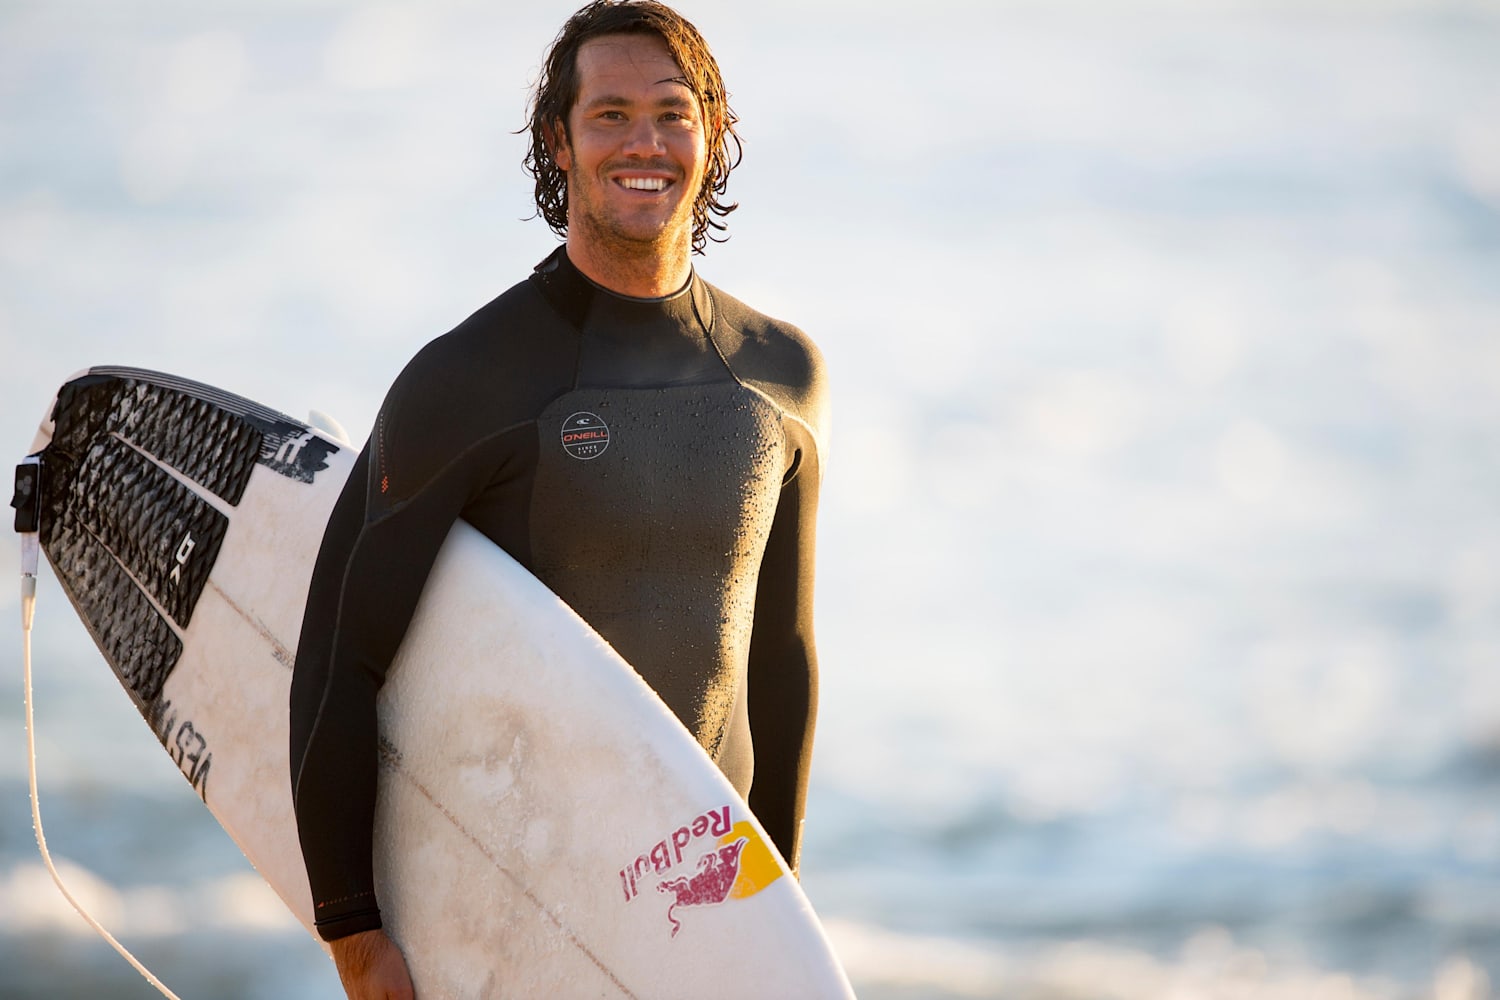 Jordy Smith: Surfing – Red Bull Athlete Profile